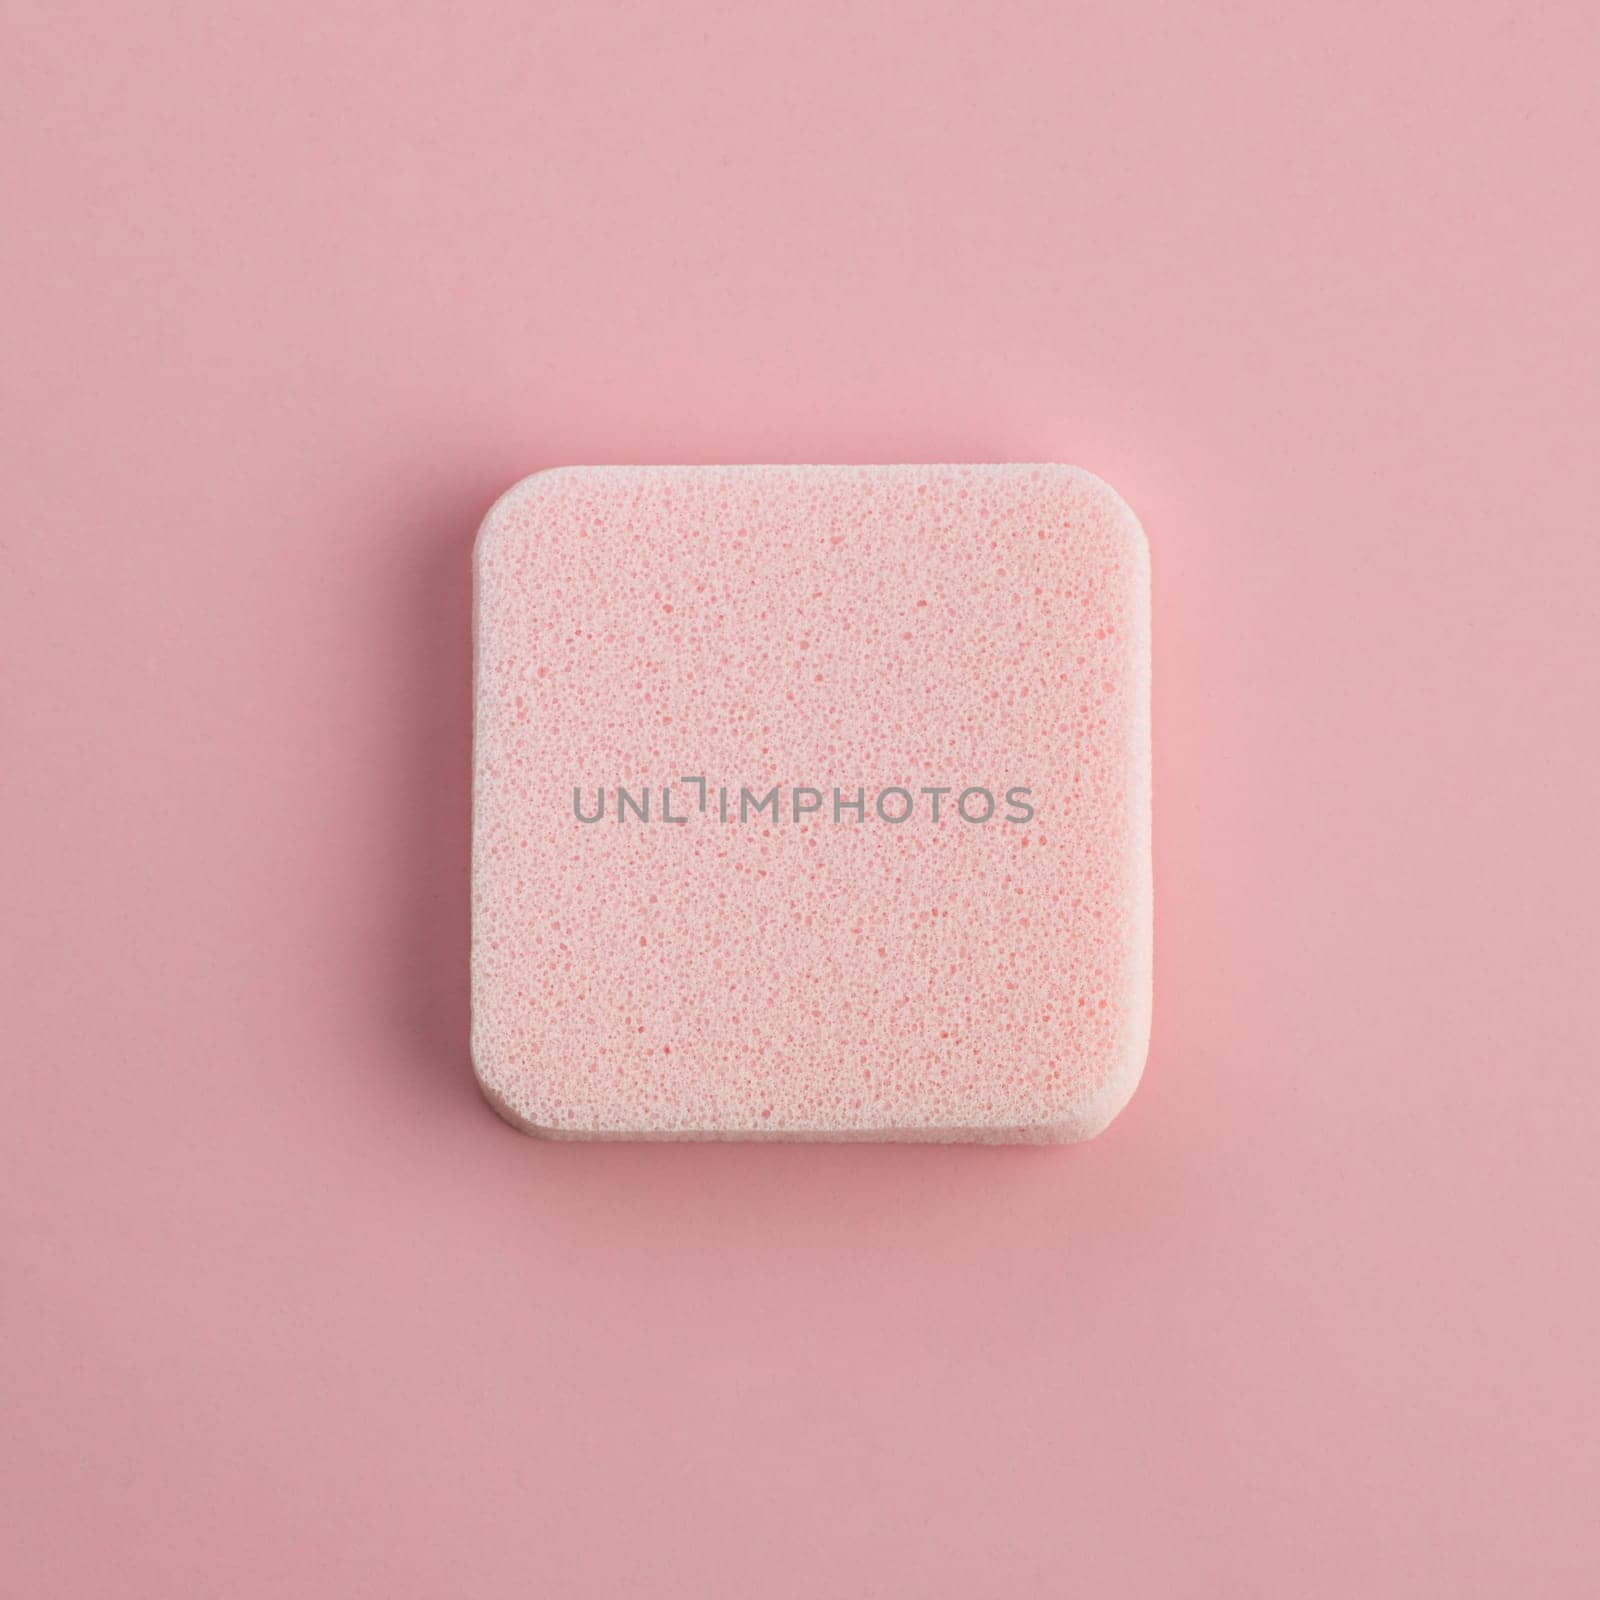 Cosmetic sponge on a pink background. Top view by A_Karim